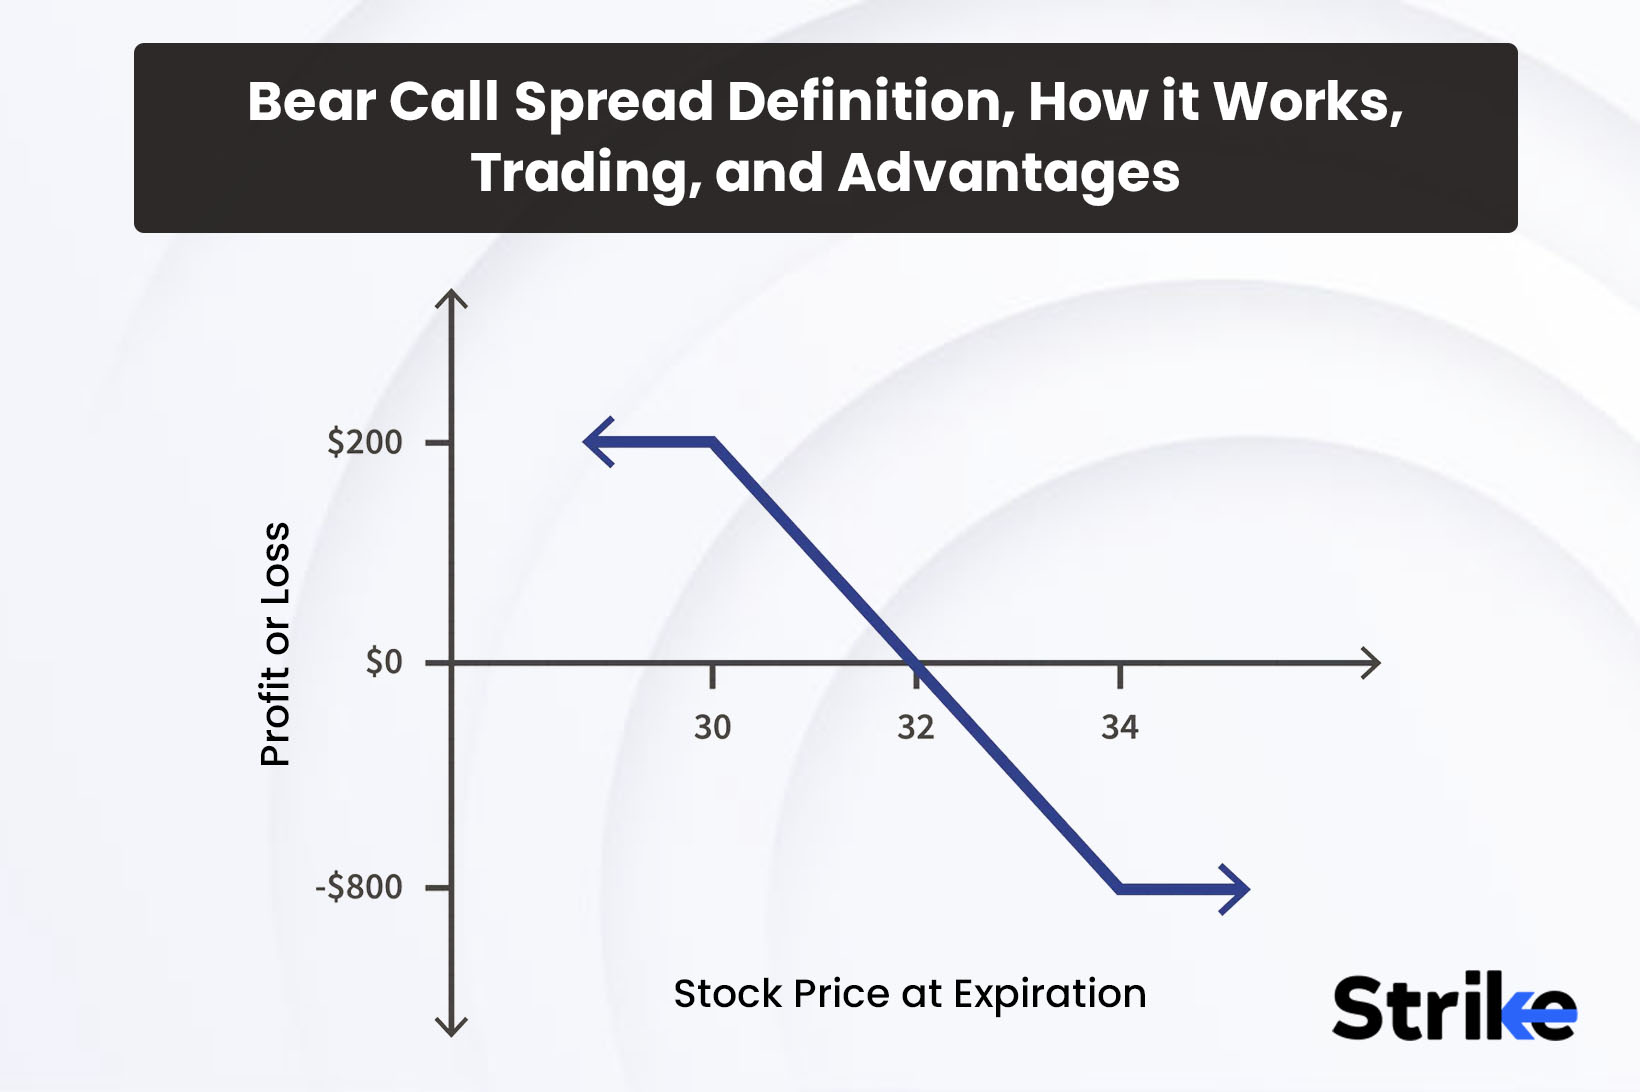 Bear Call Spread: Definition, How it Works, Trading, and Advantages